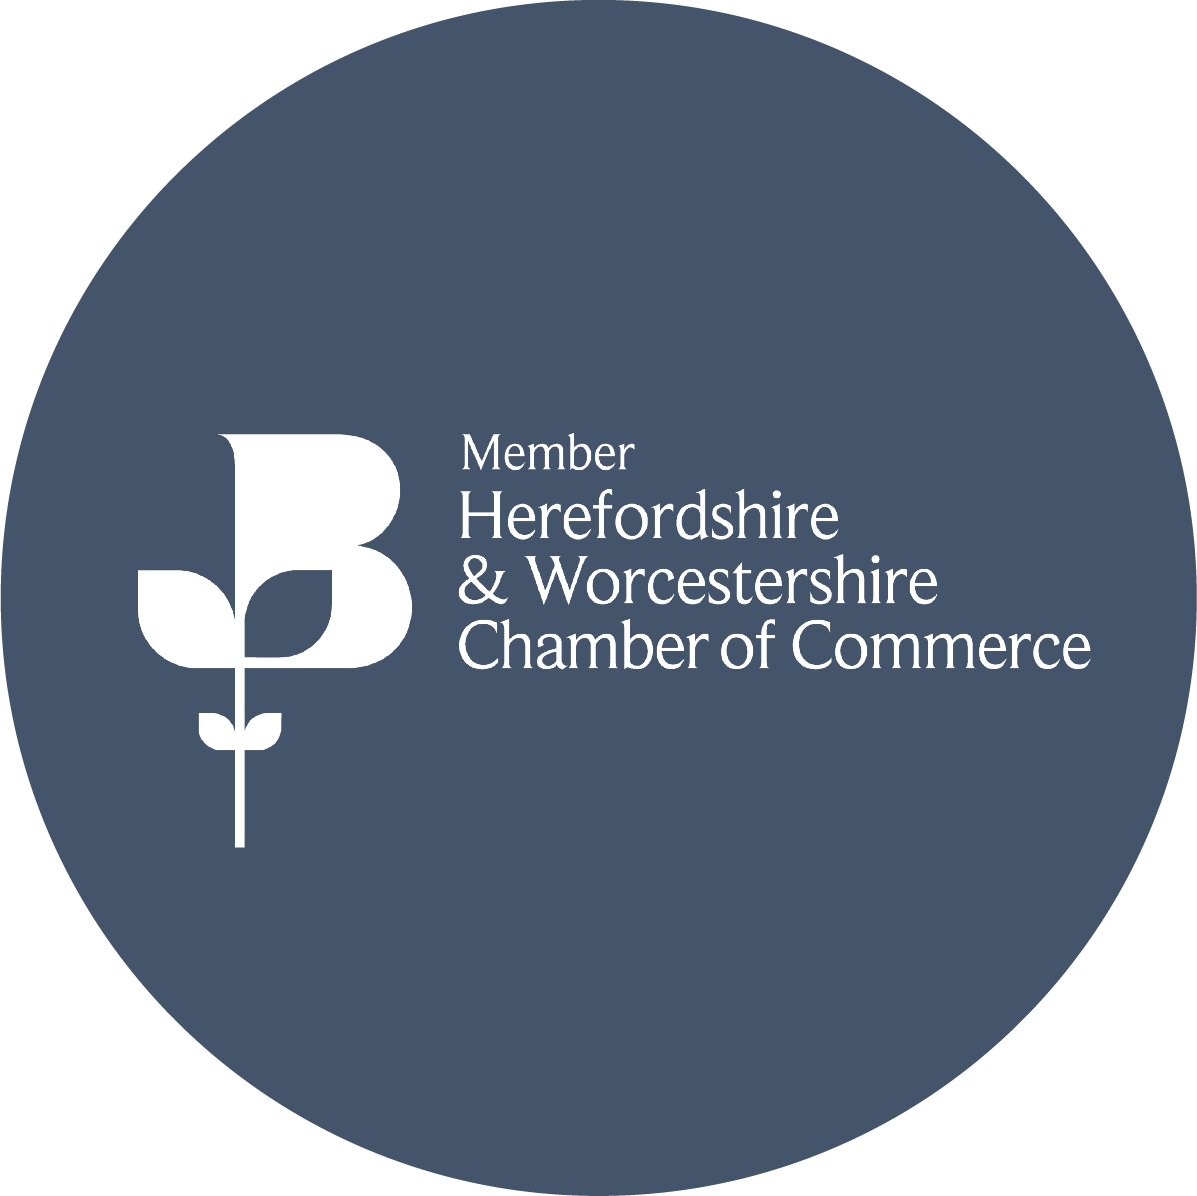 Herefordshire & Worcestershire Chamber of Commerce logo in white and in blue circle